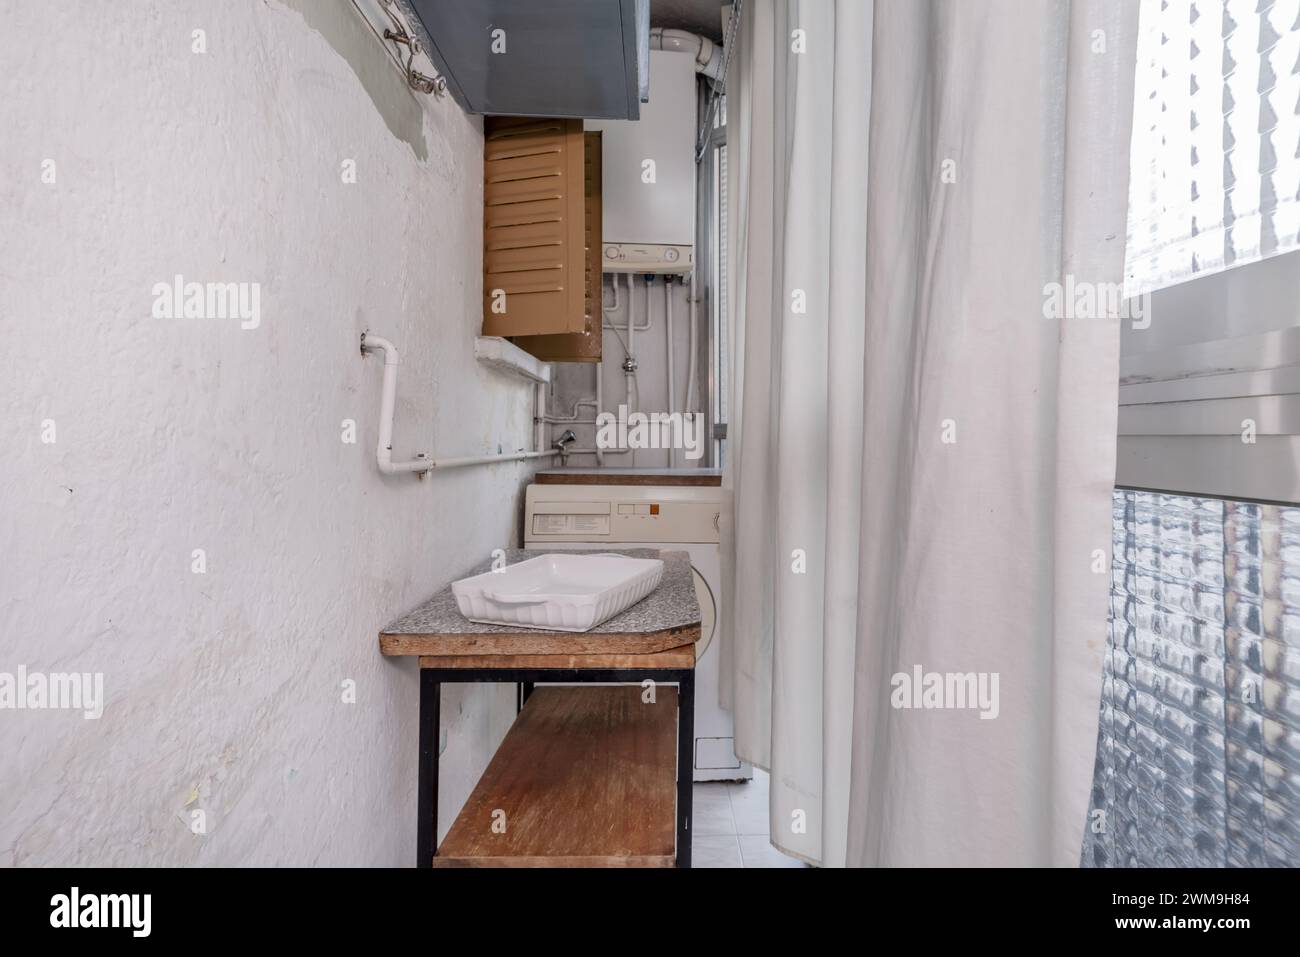 A small terrace balcony with metal windows and glass and aluminum doors, a washing machine and a water heater Stock Photo